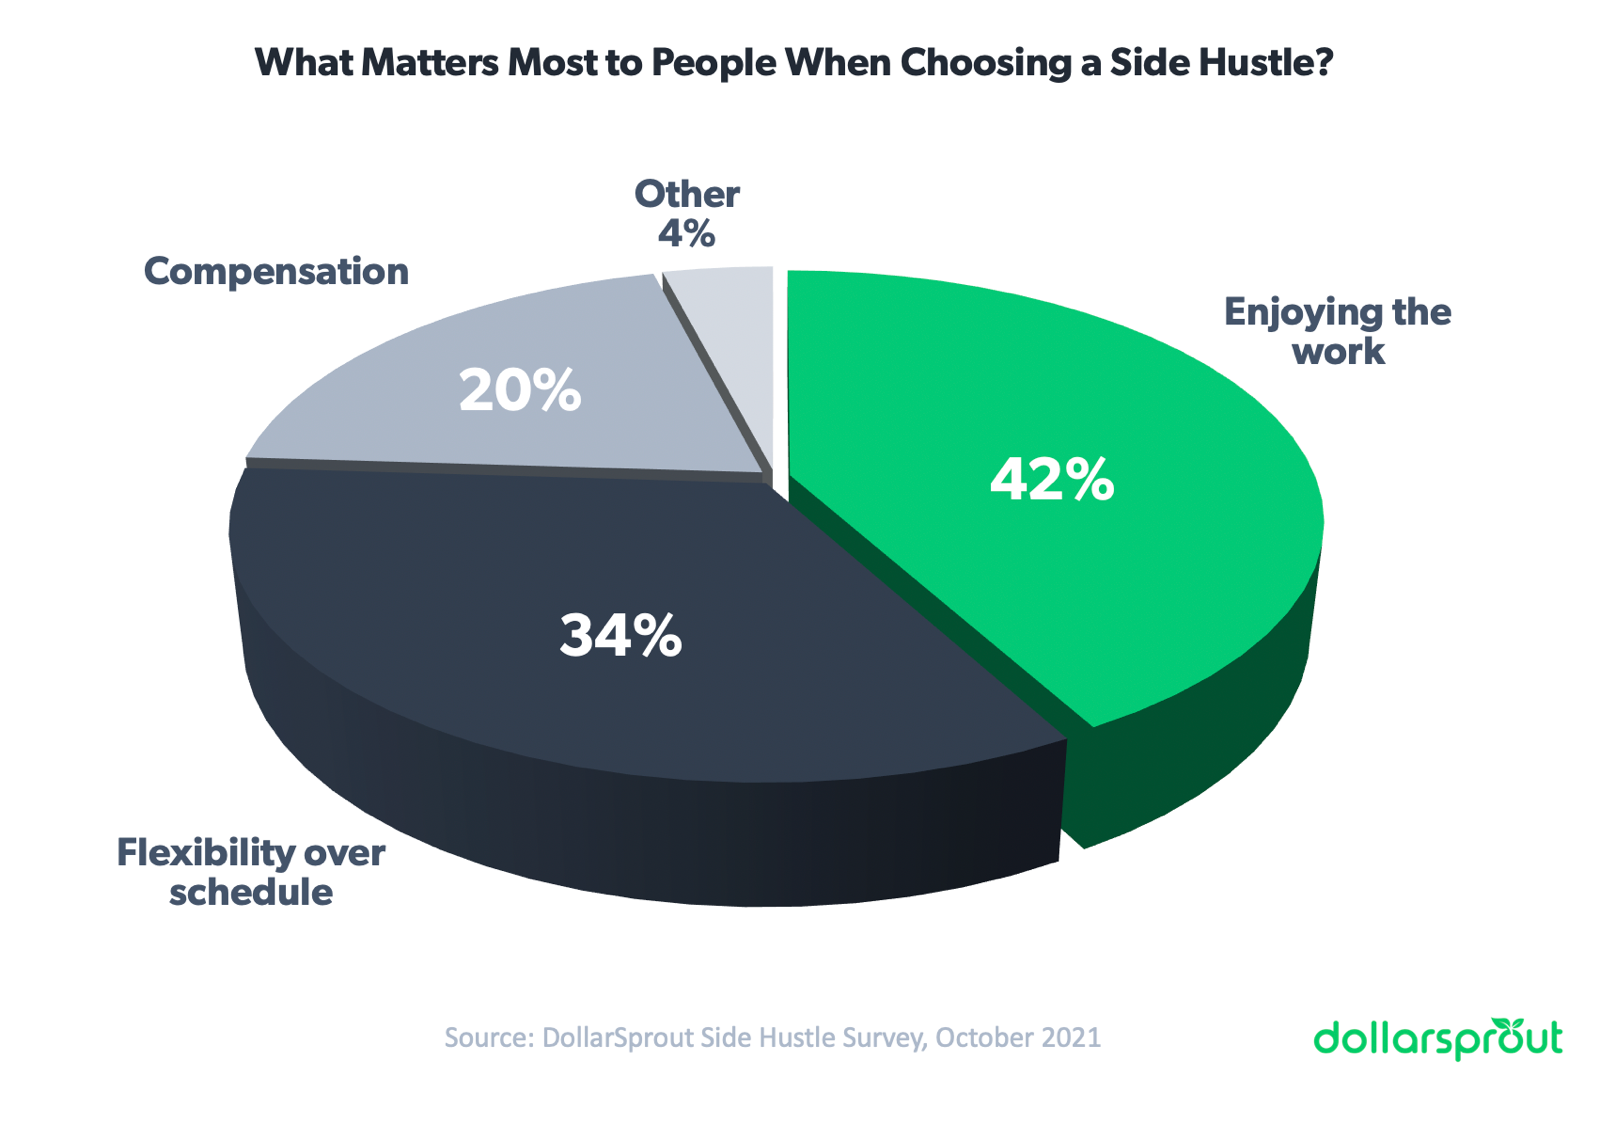 Pie chart showing that what matters most to side hustlers is enjoying the work, followed by flexibility over their time. Compensation was ranked 3rd most important factor.